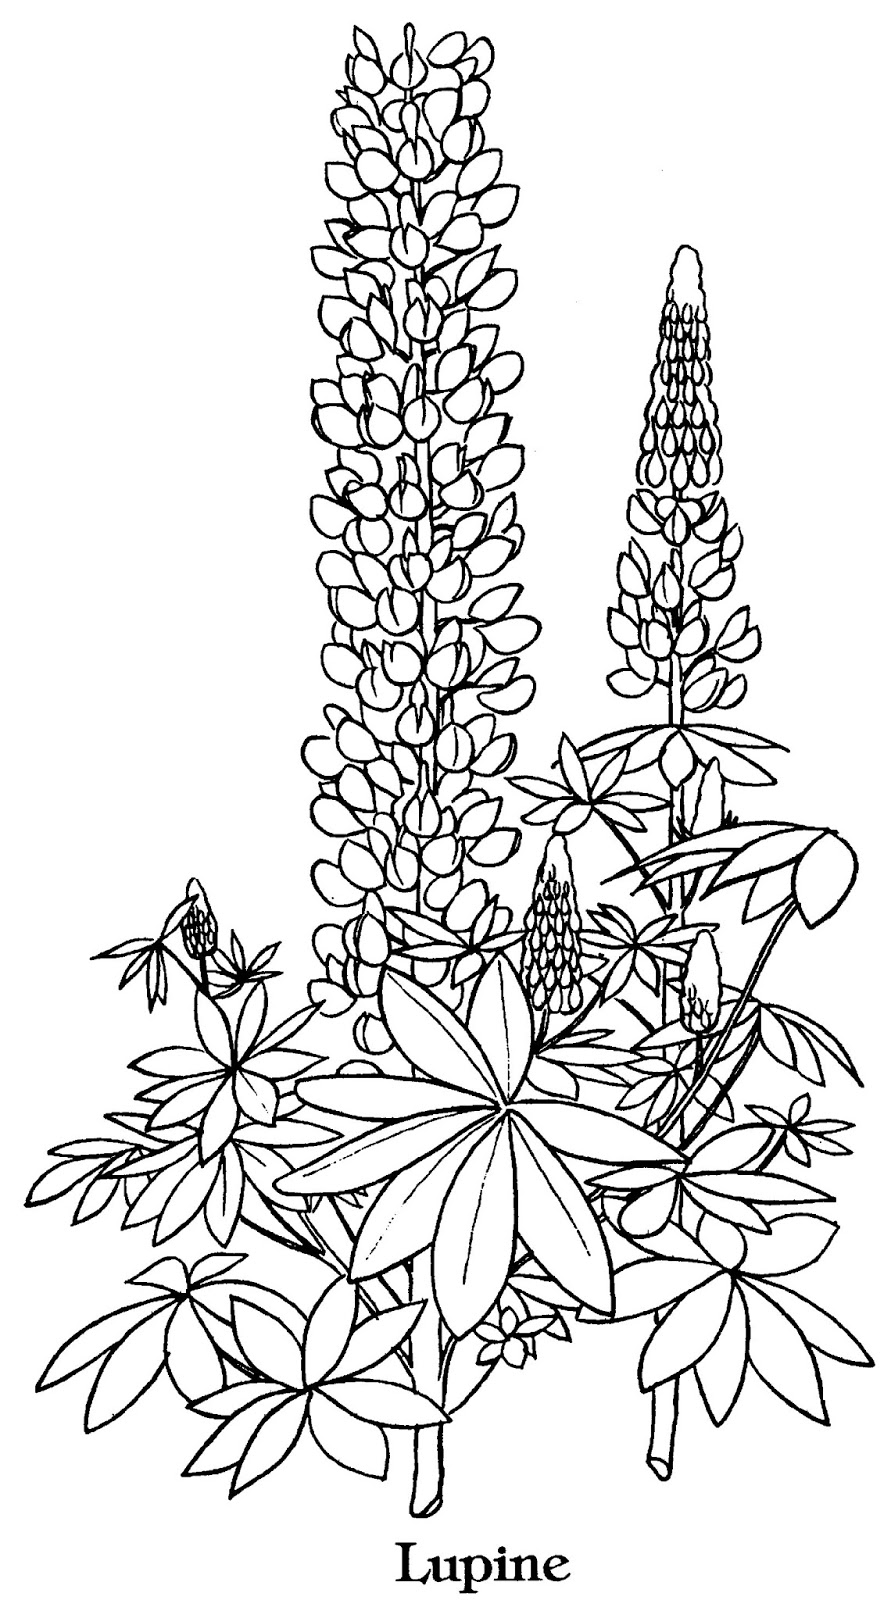 Lupine coloring #12, Download drawings